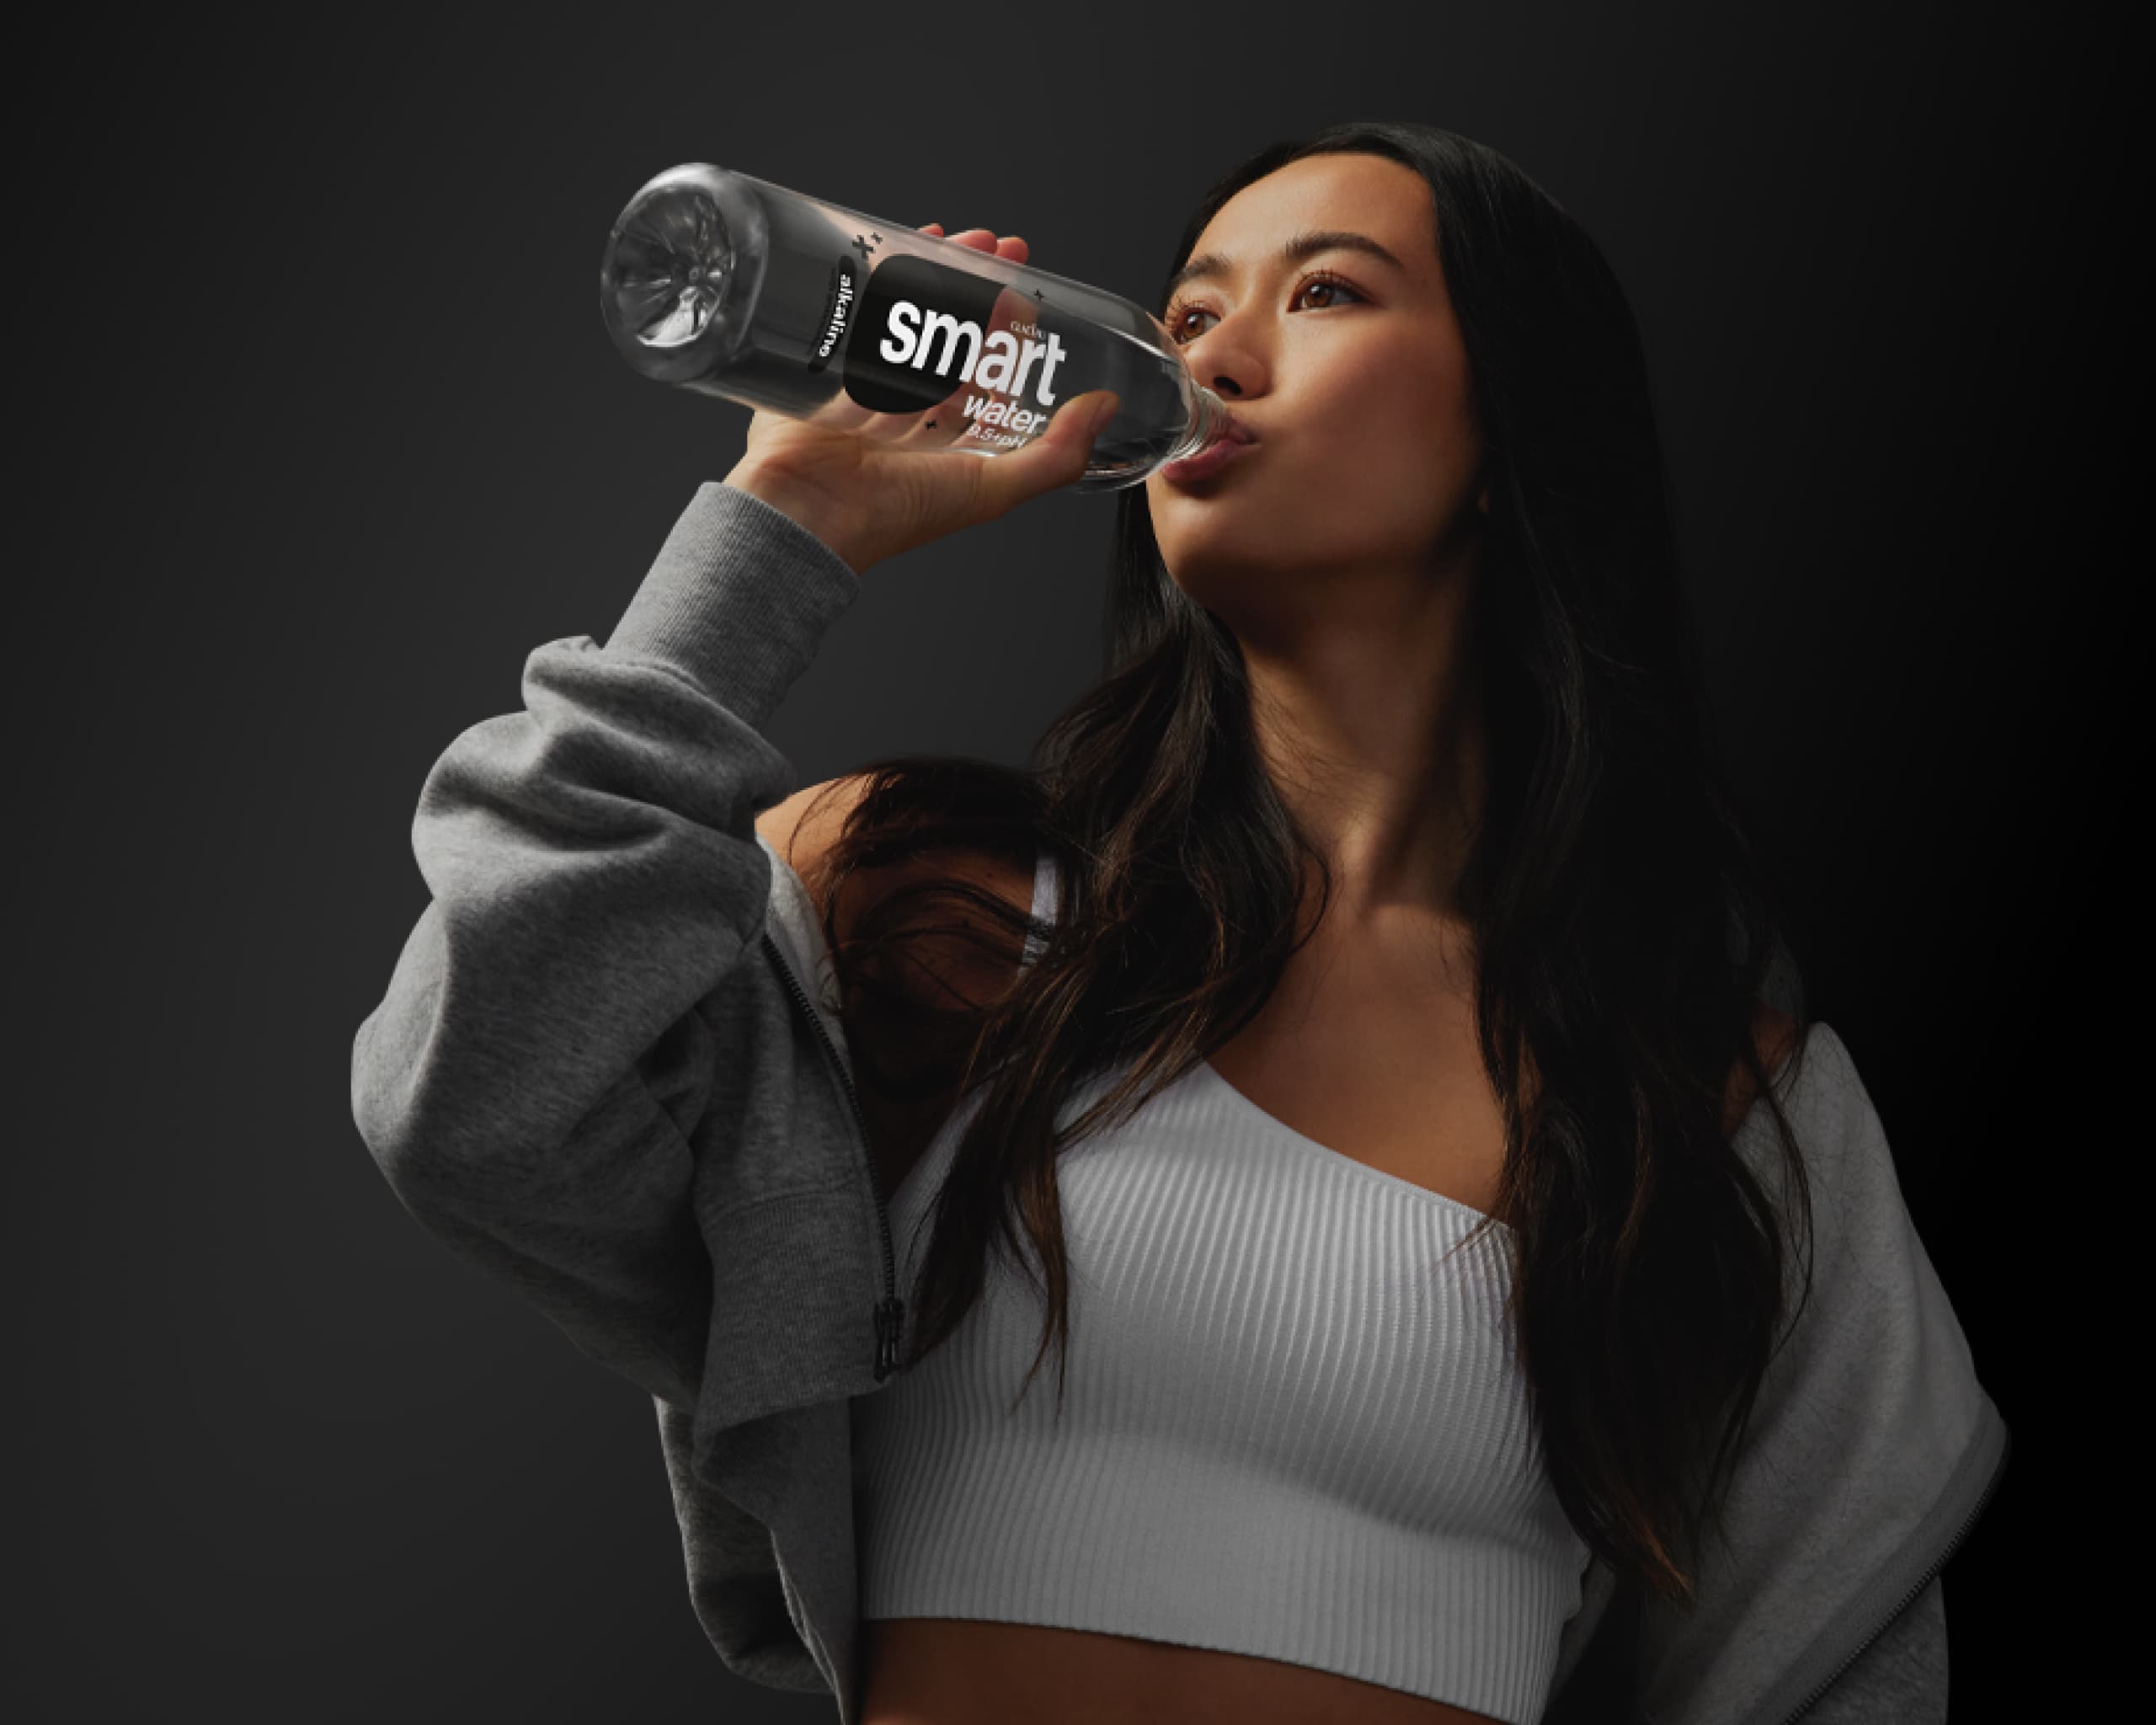 a woman drinking a bottle of smartwater